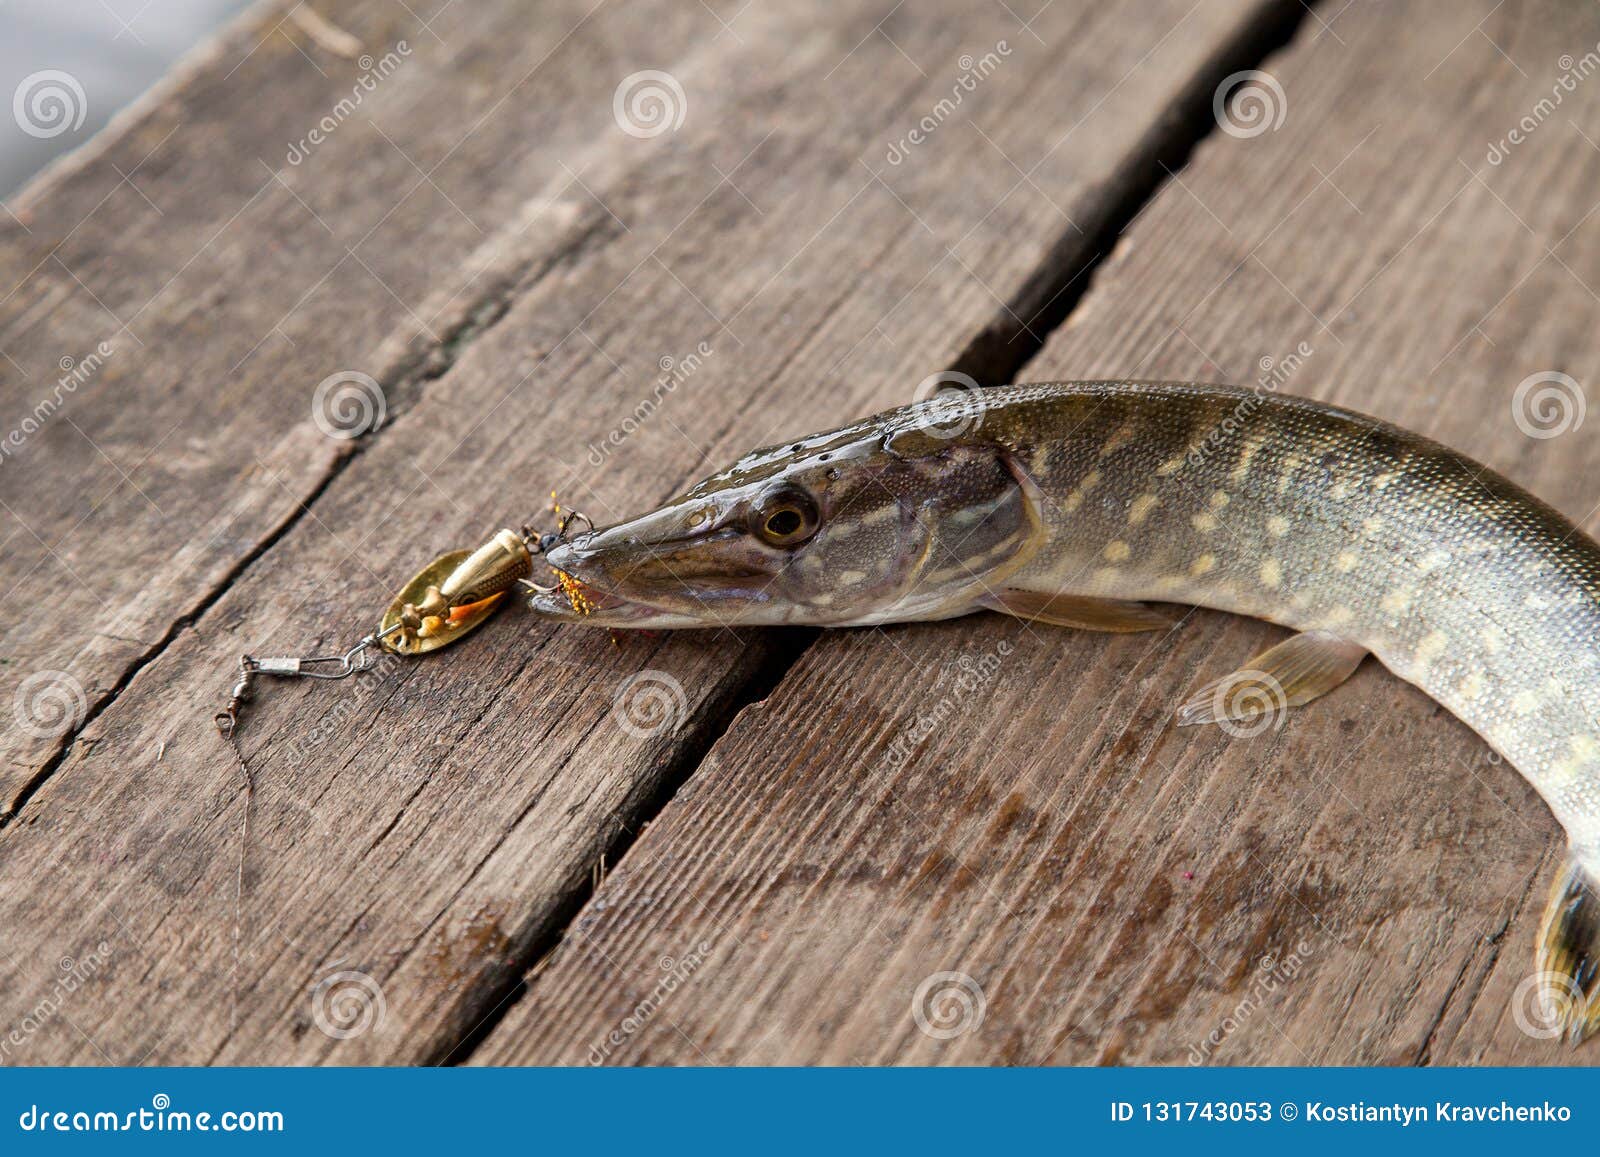 Freshwater Northern Pike Fish Know As Esox Lucius with Lure in Mouth Lying  on Vintage Wooden Background. Fishing Concept, Good Stock Image - Image of  northern, close: 131743053